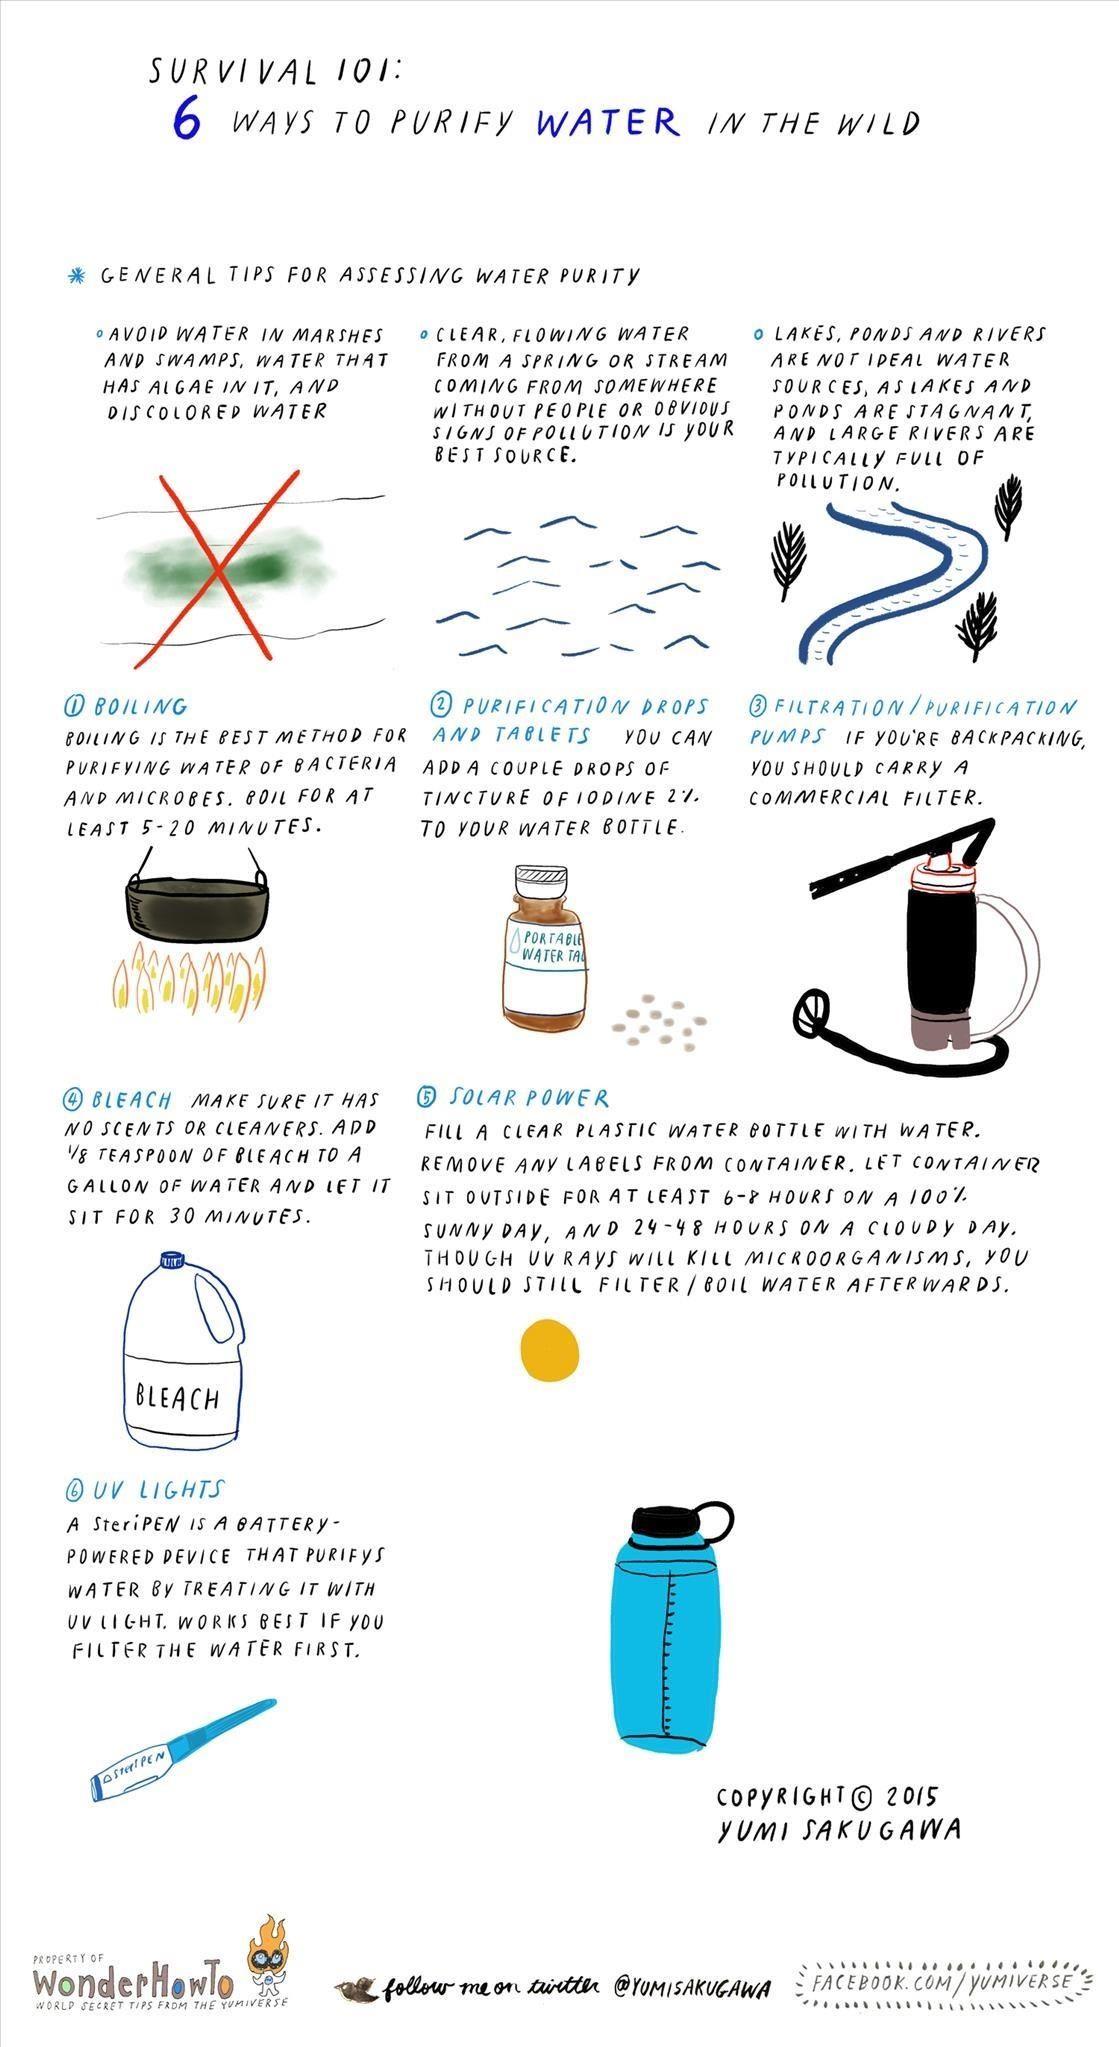 Learn These Survival Skills on How to Purify Water 